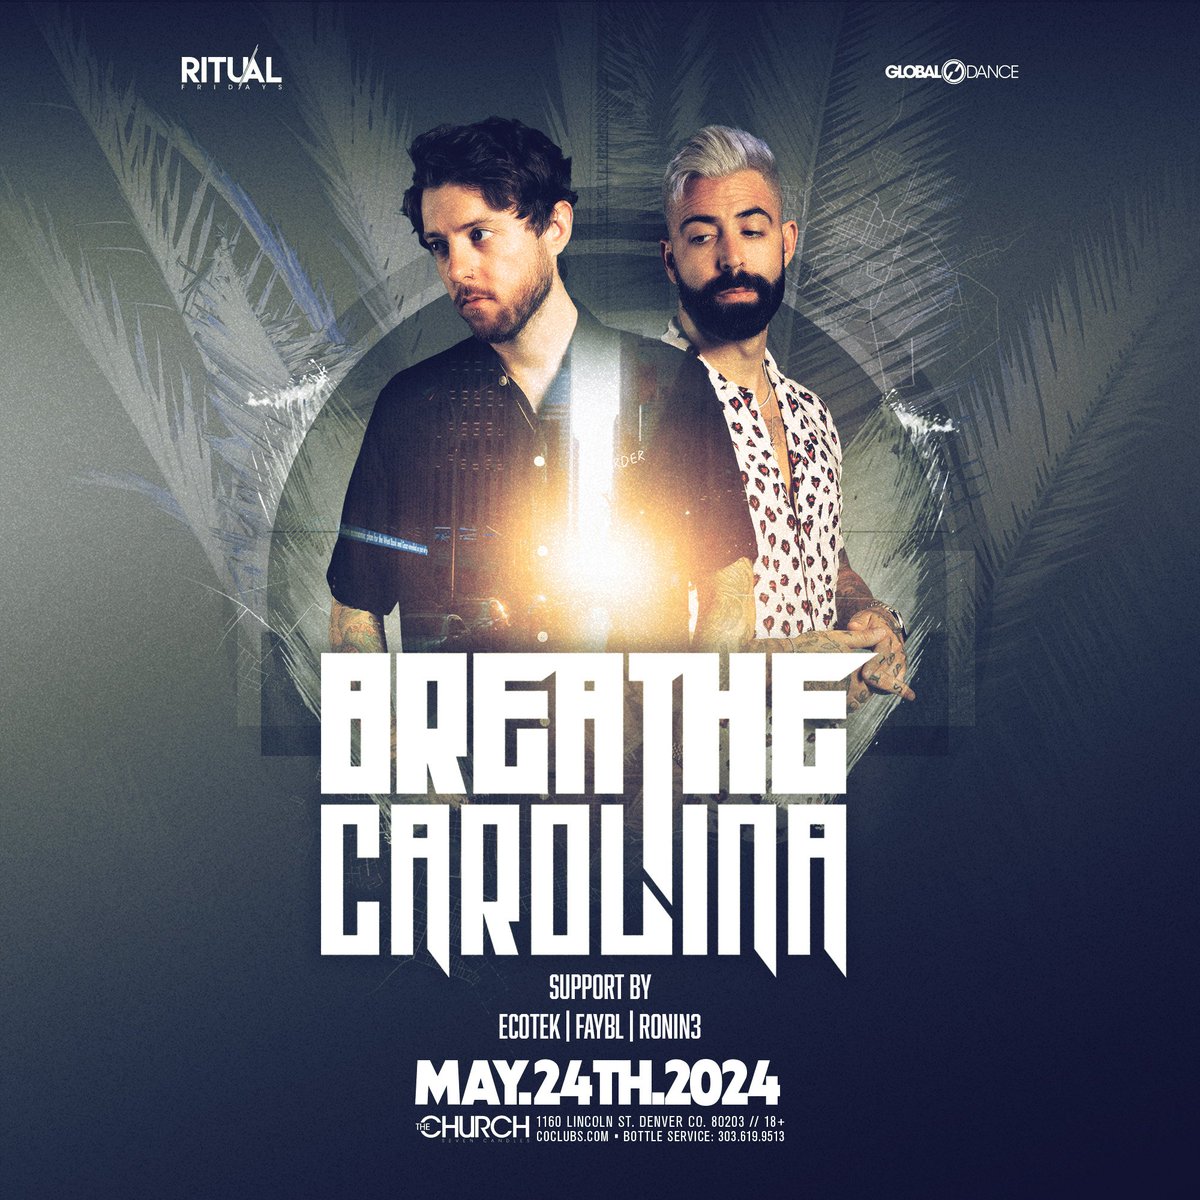 🚨 JUST ANNOUNCED 🚨 Denver are you ready to get down with @BreatheCarolina when they drop back by @ChurchNightClub for Ritual Fridays on May 24th?! Buy your tickets here ⏩ bit.ly/ritualxcarolina